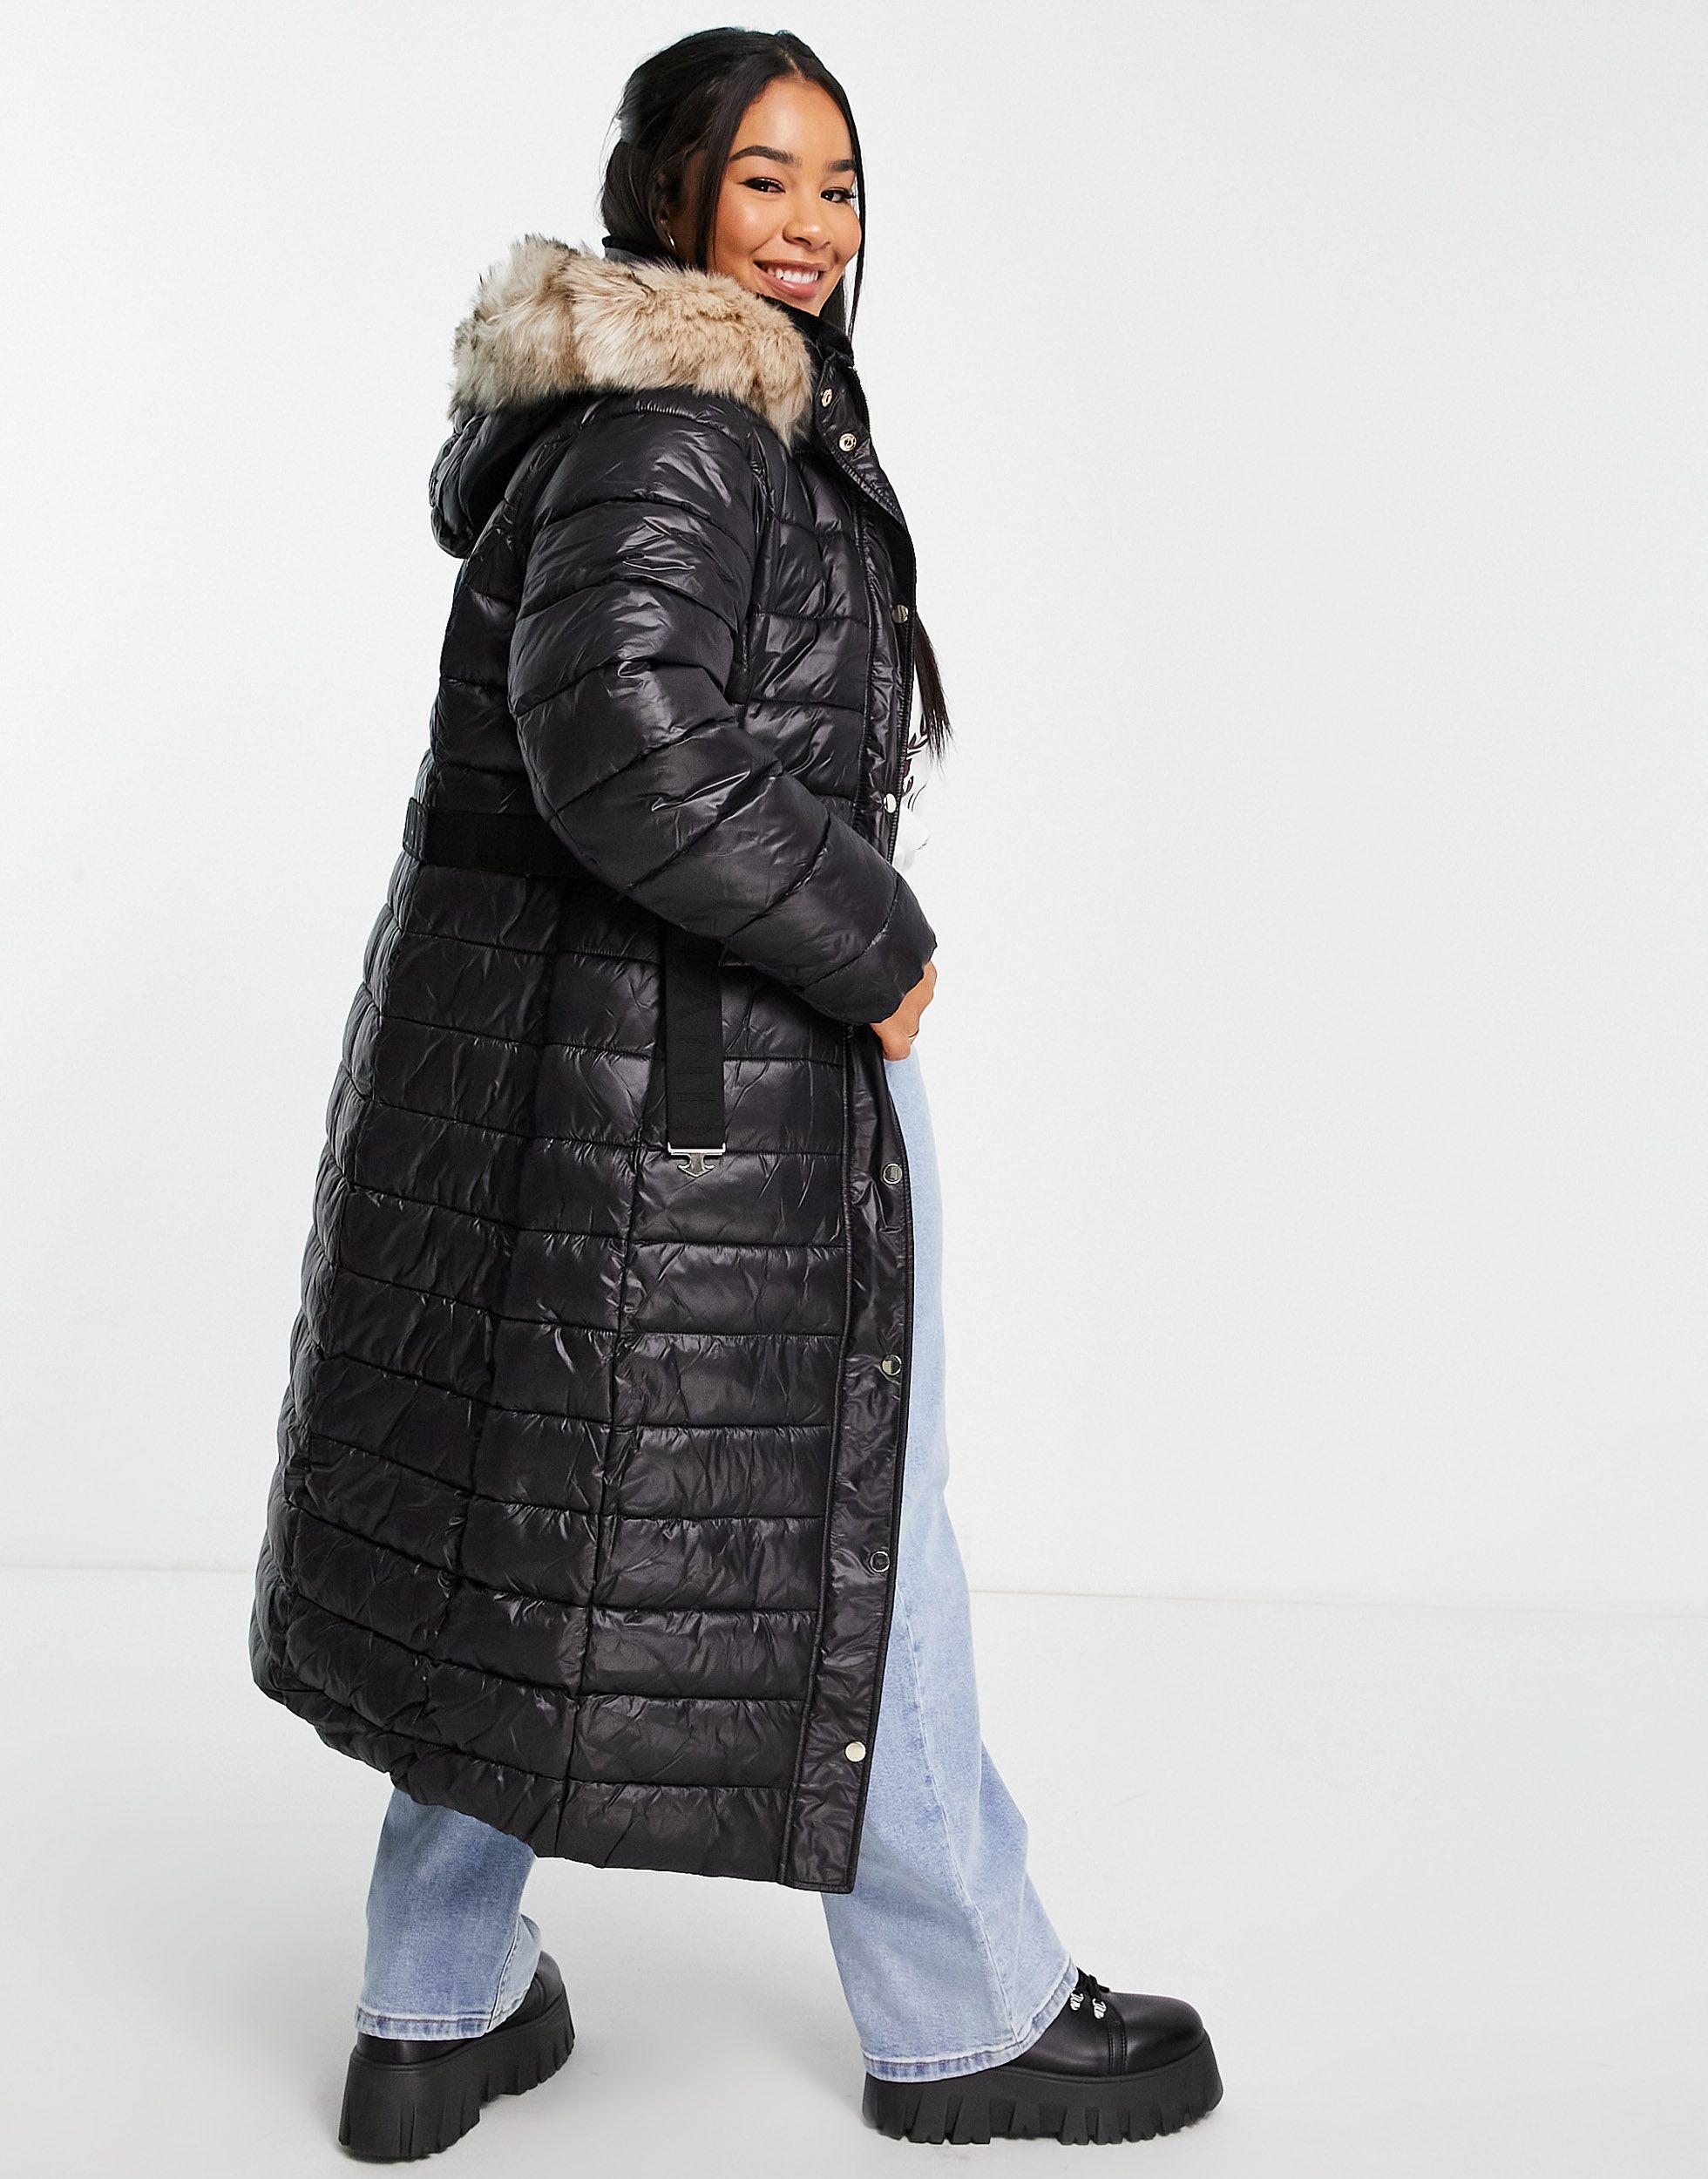 New River Island Parka Fur,size Available 12 And 14,black 